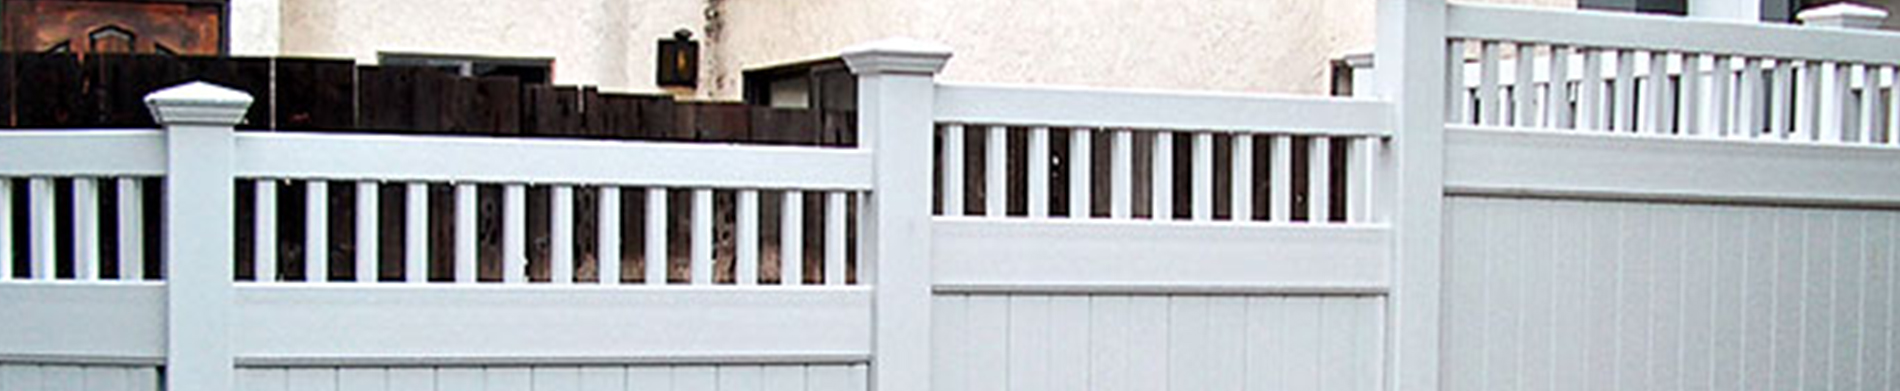 Are You Planning To Invest in Vinyl Privacy Fence Panels? This Is a Must-Read!